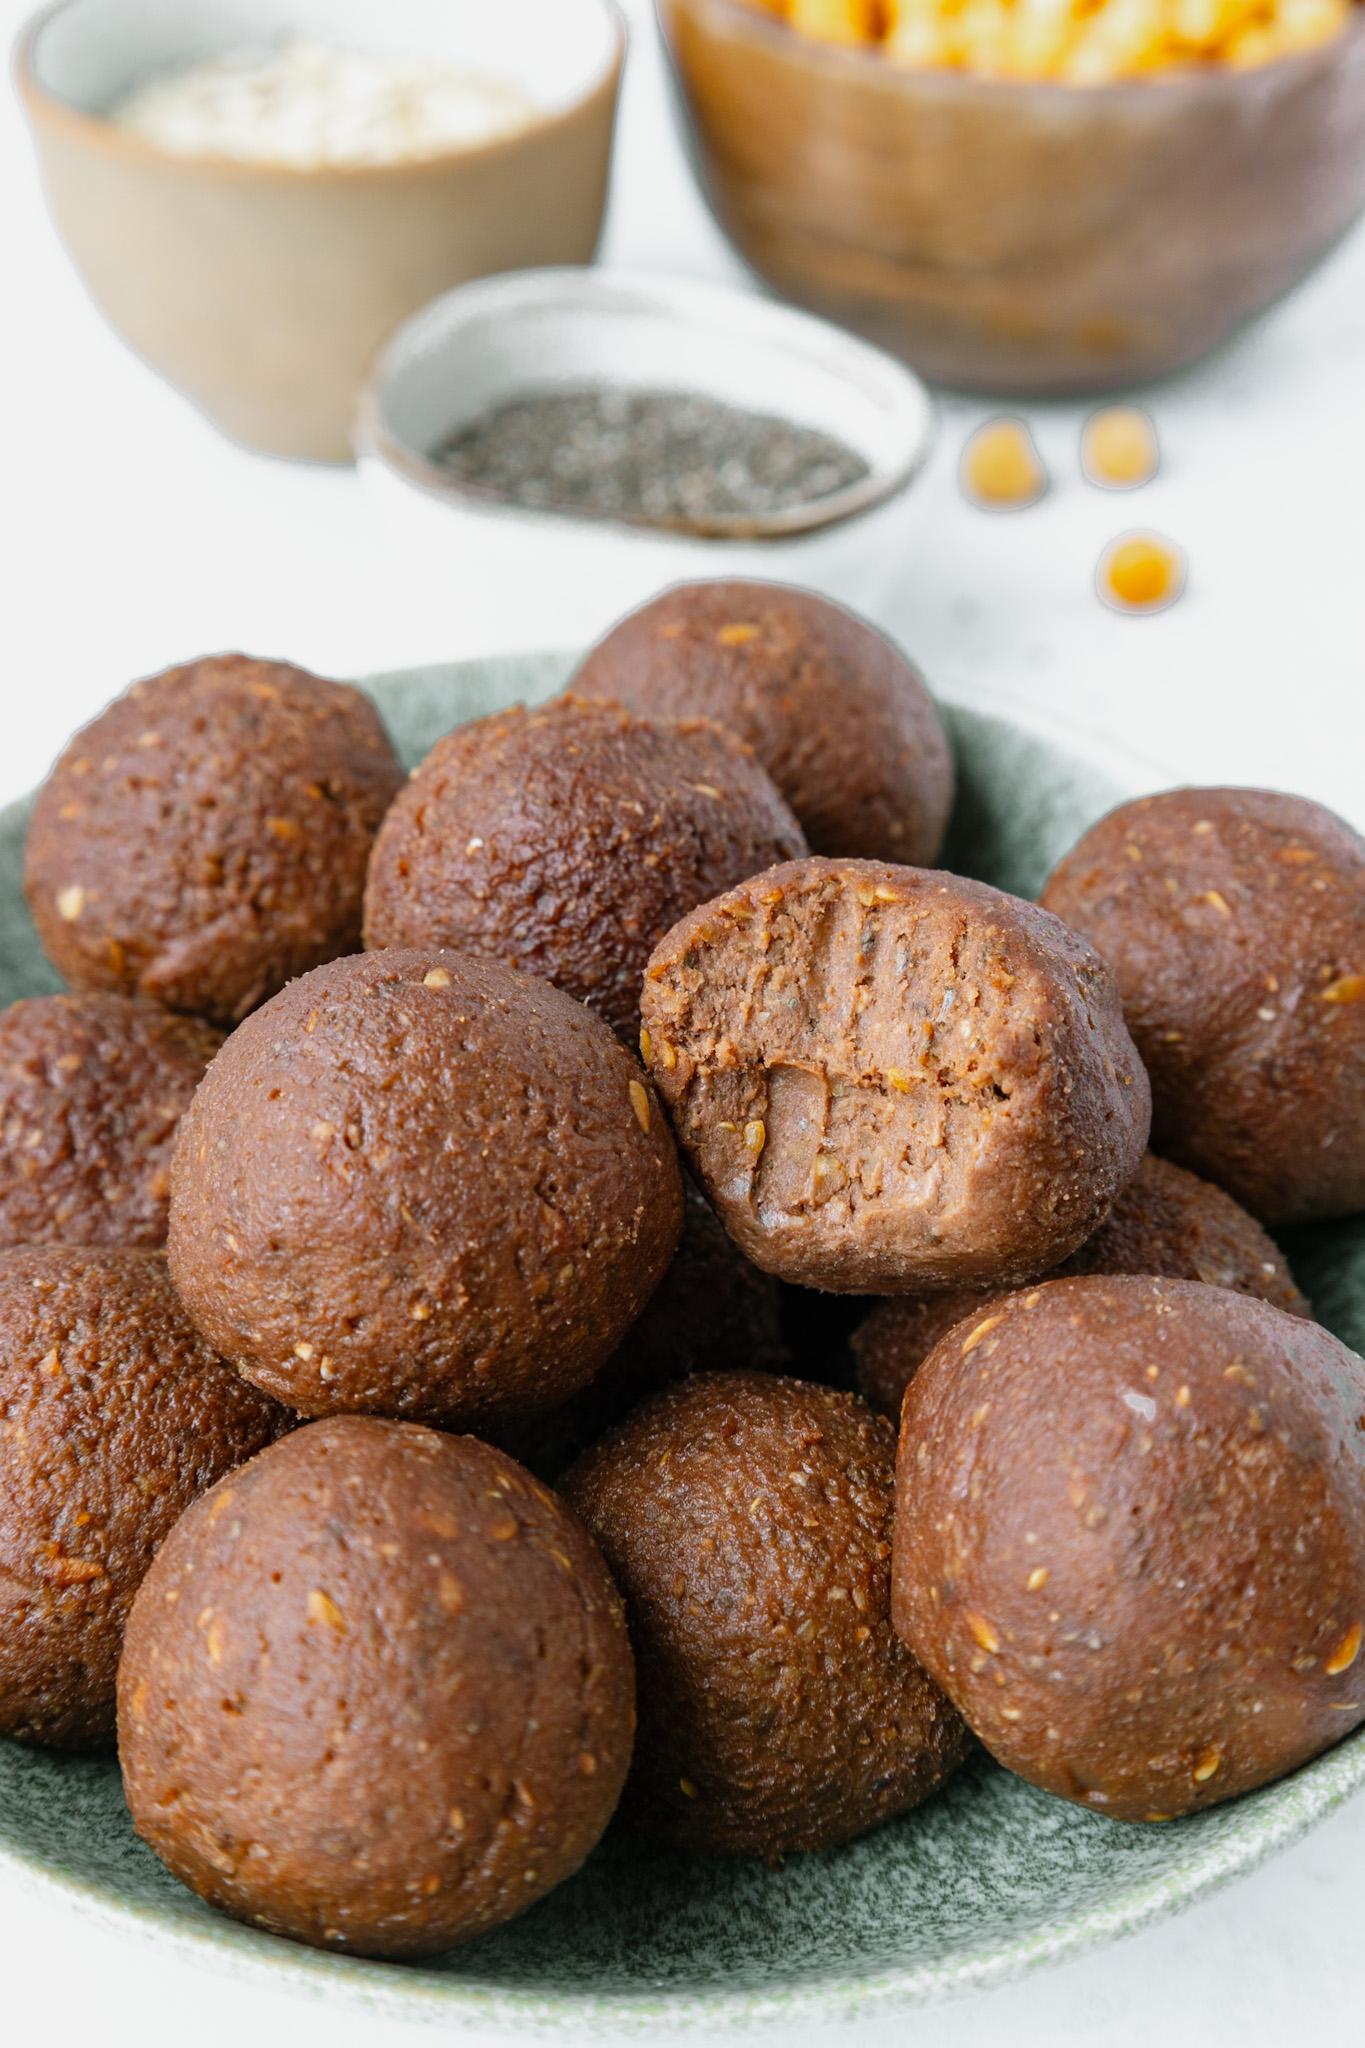 Protein balls with flax seeds, chia seeds, oats, peanut butter and cocoa powder